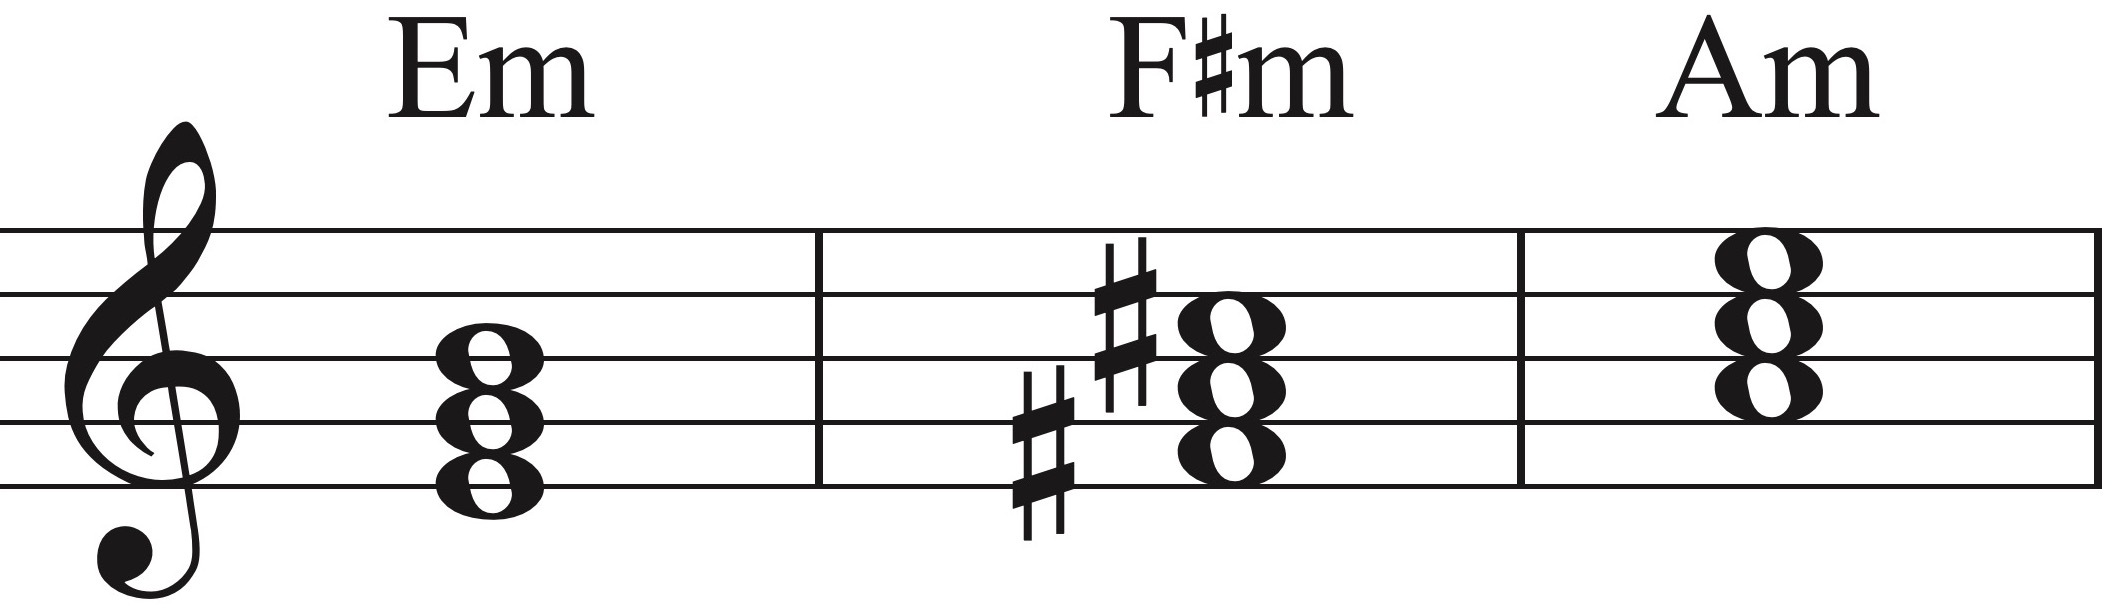 Piano chords Em, F#m, and Am.